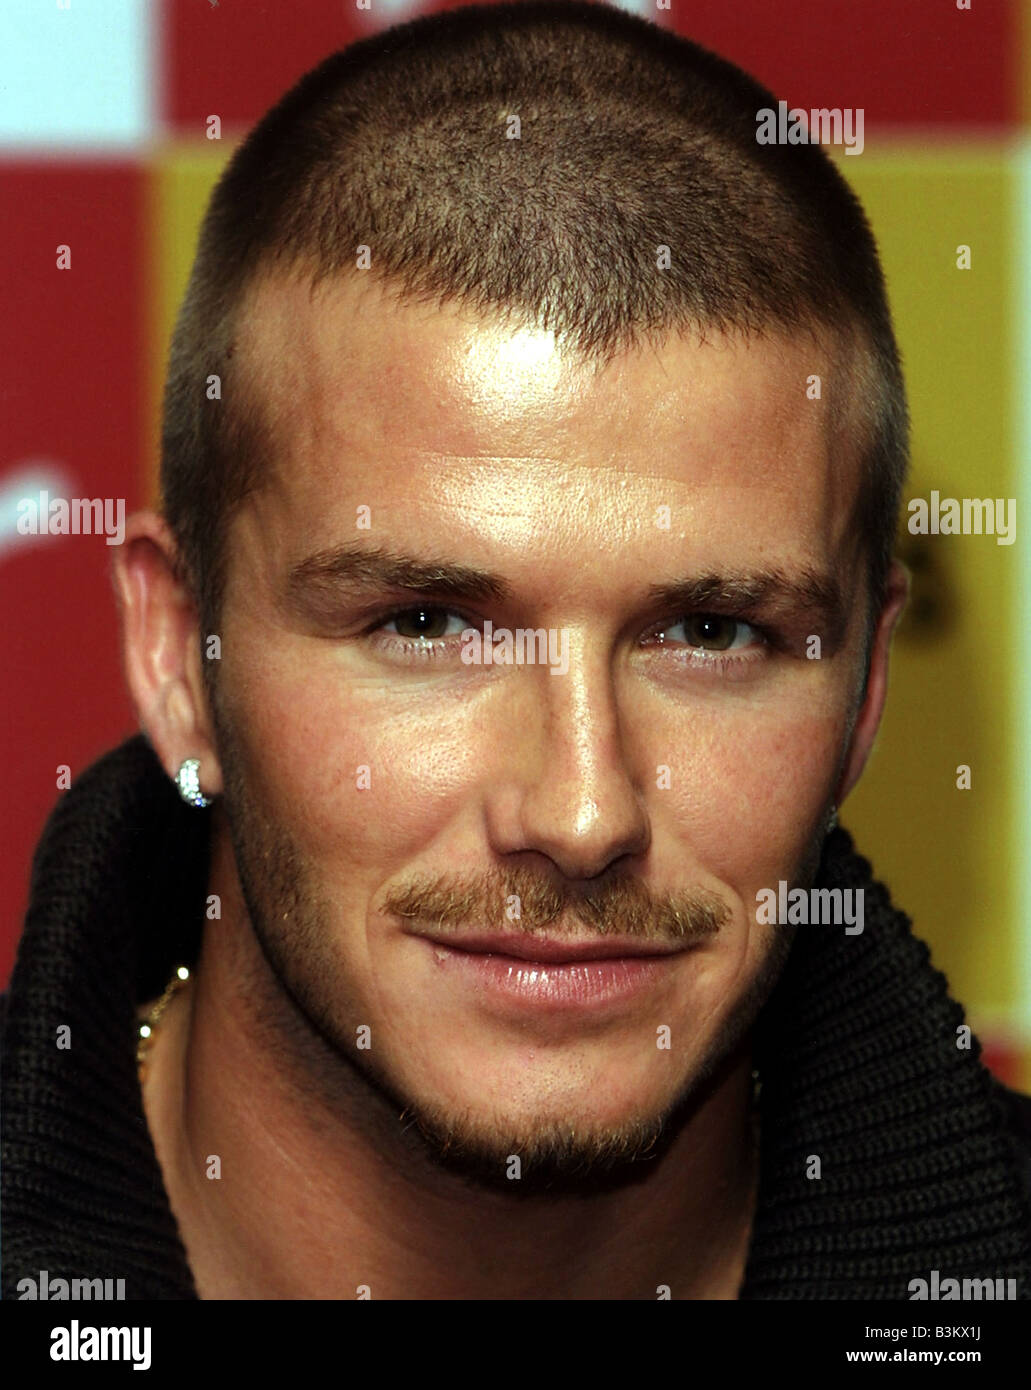 Beckham 2001 High Resolution Stock Photography and Images - Alamy